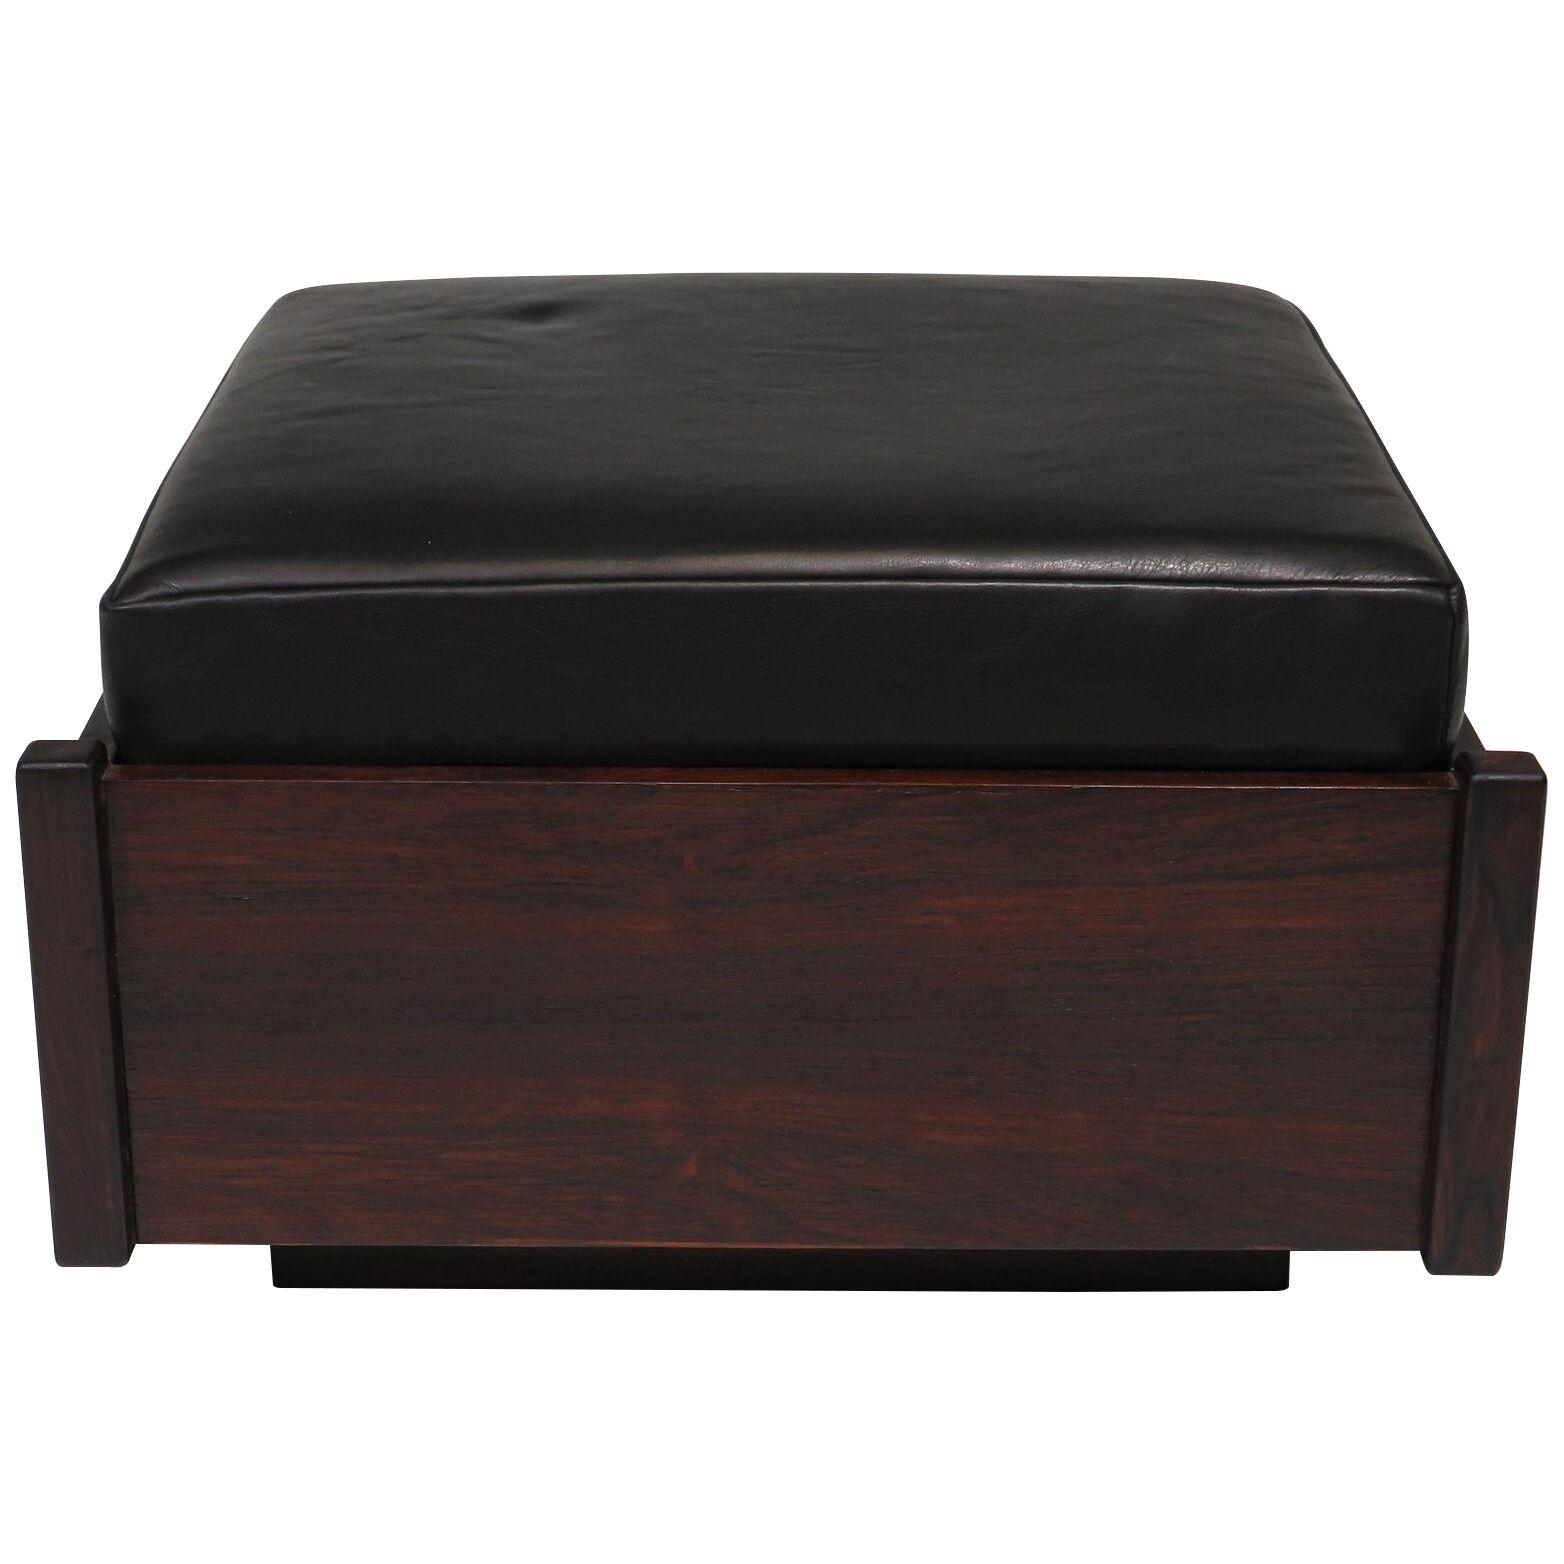 Celina Decoracoes Rosewood Leather Bench with Storage